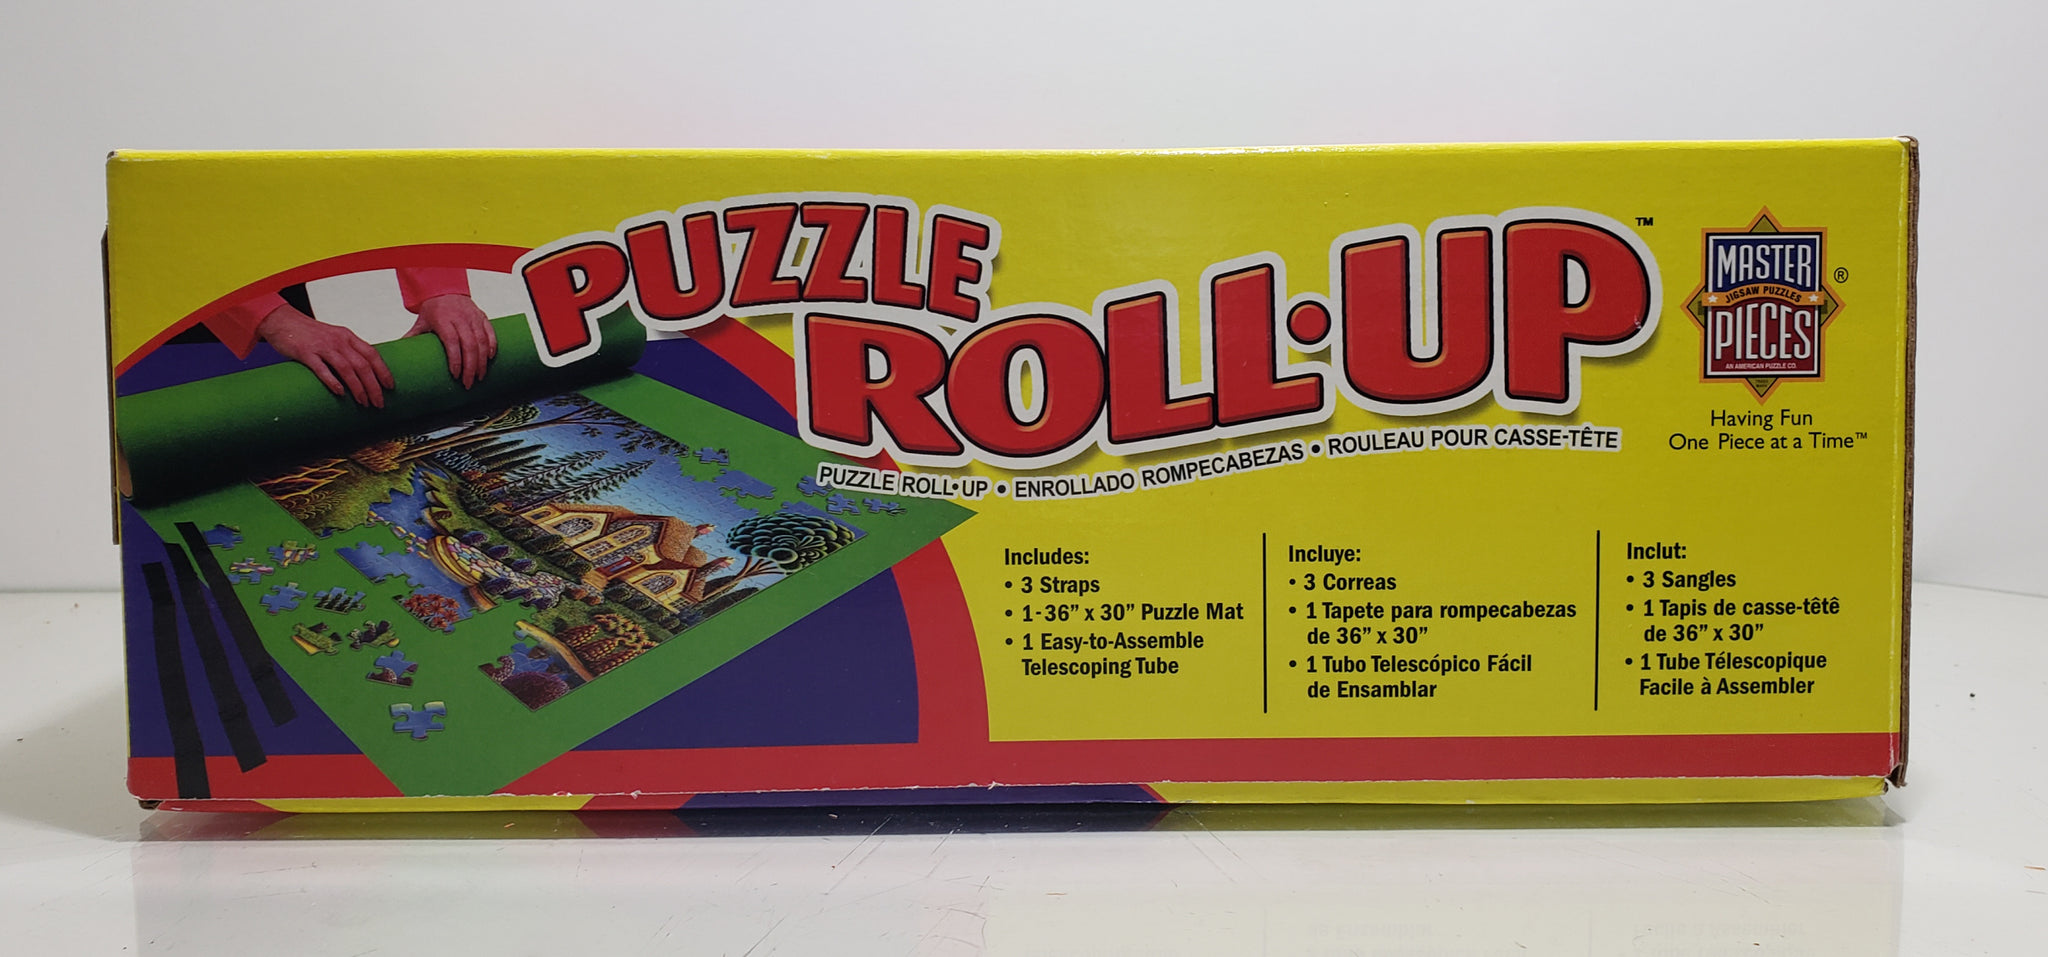 Tapete Roll Your Puzzle –